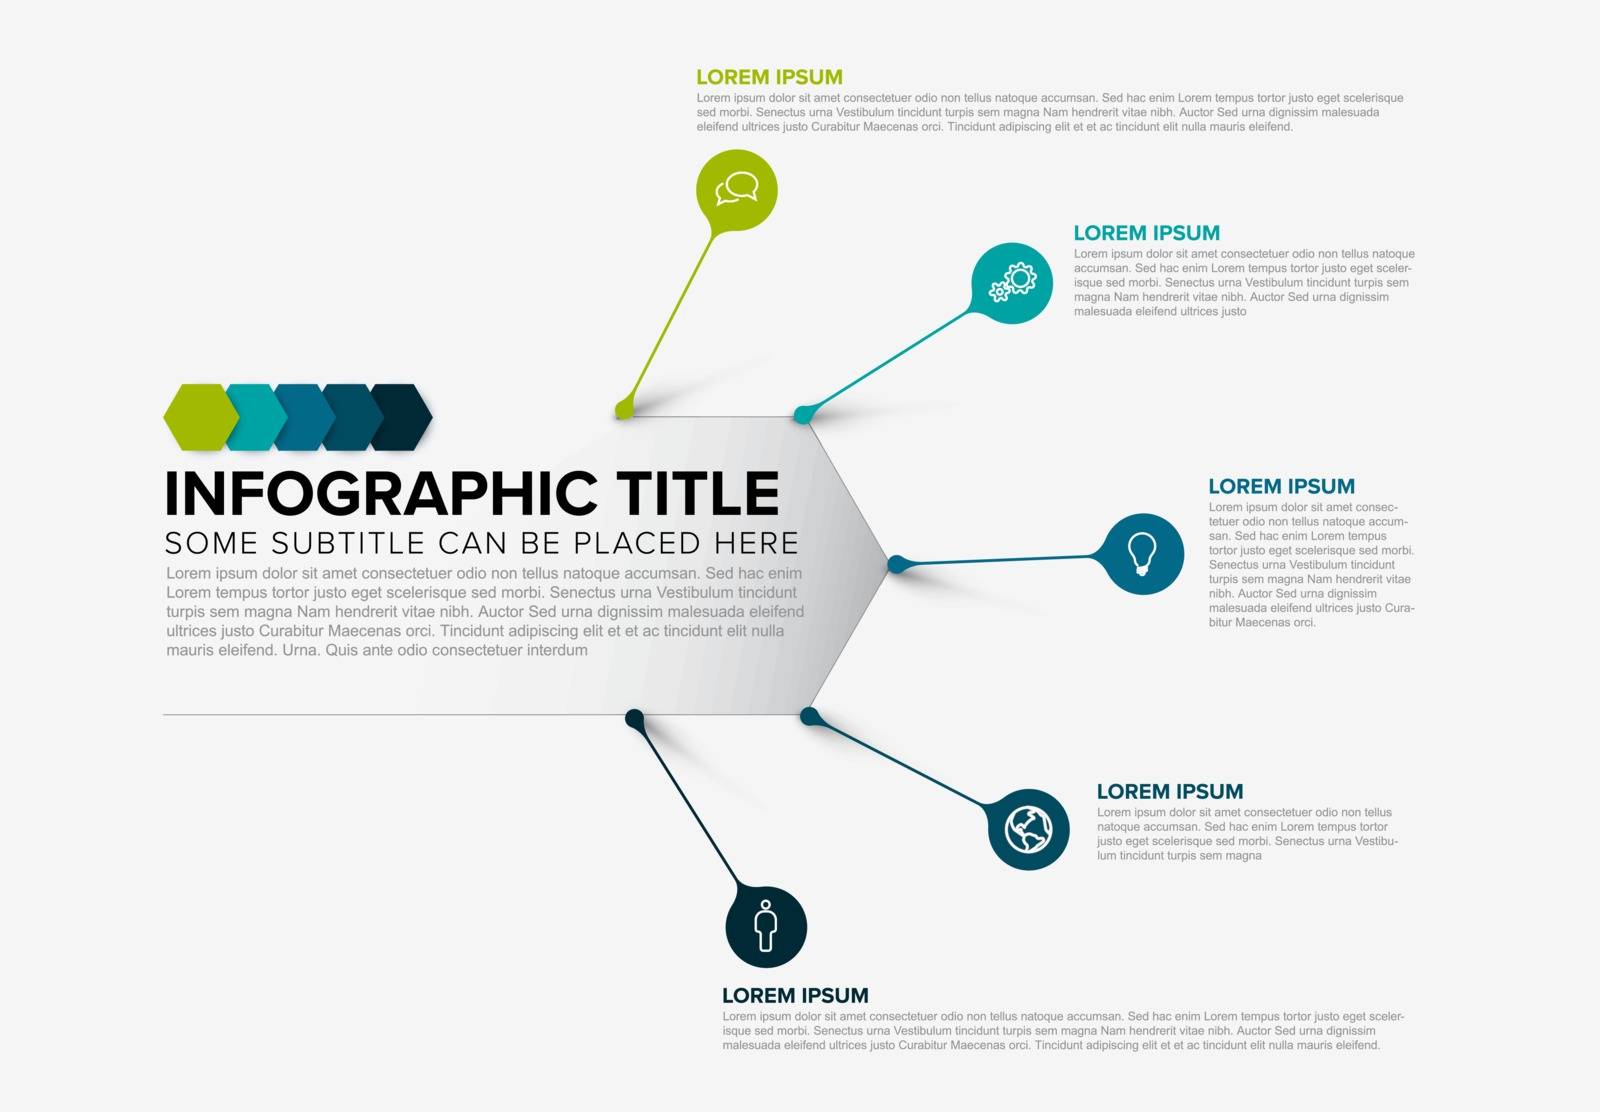 Multipurpose infographic with droplet pointers by orson